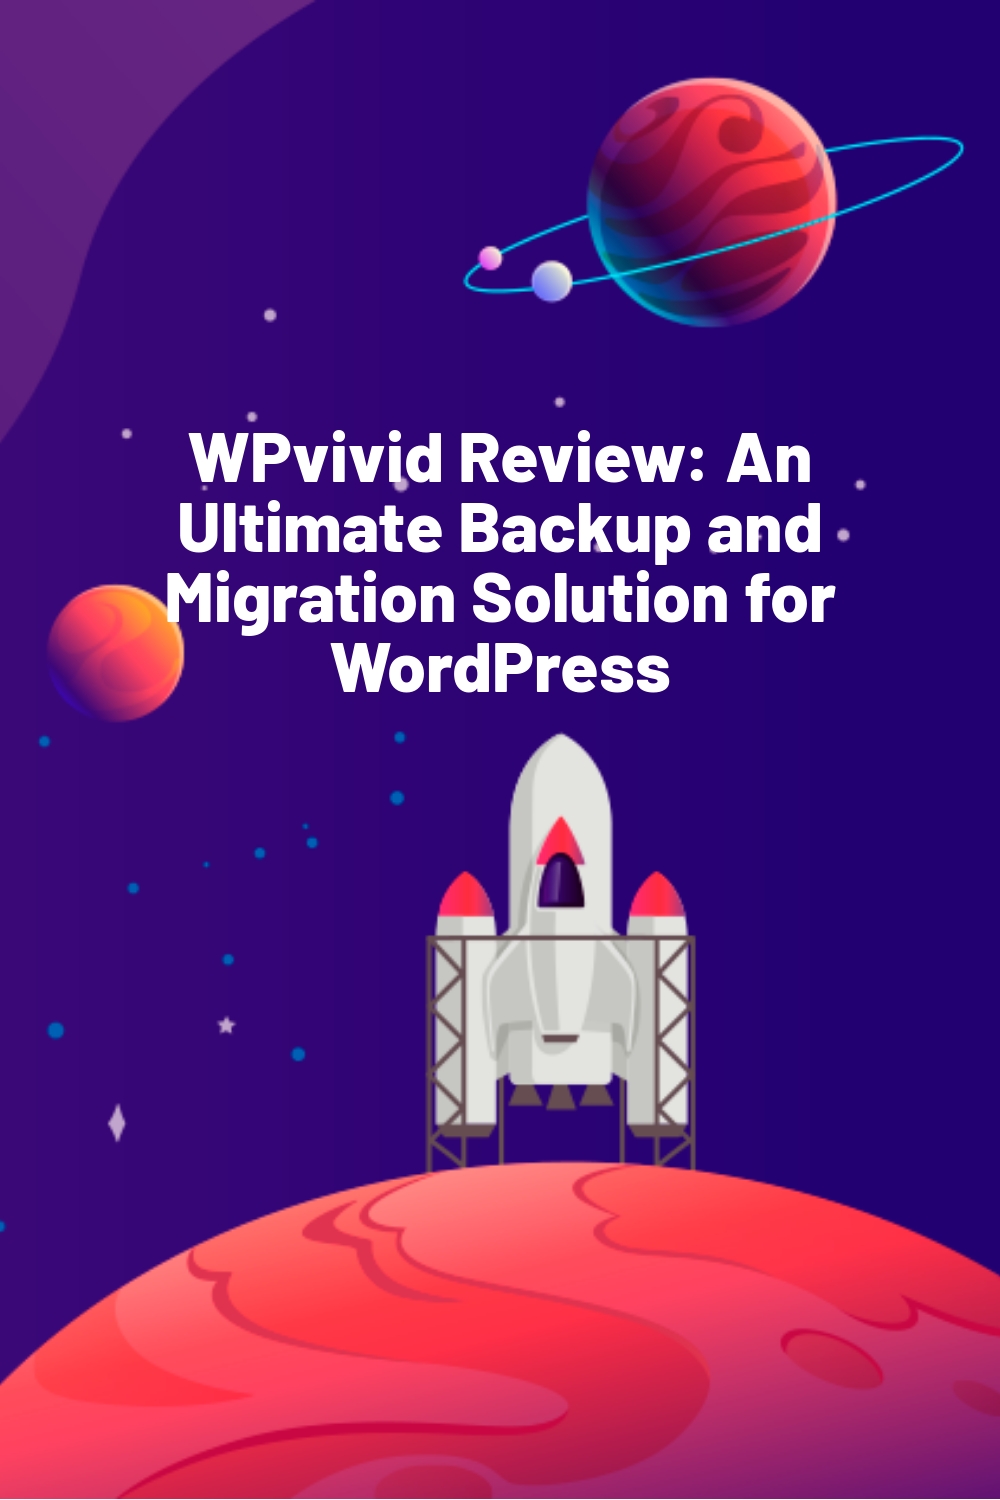 WPvivid Review: An Ultimate Backup and Migration Solution for WordPress